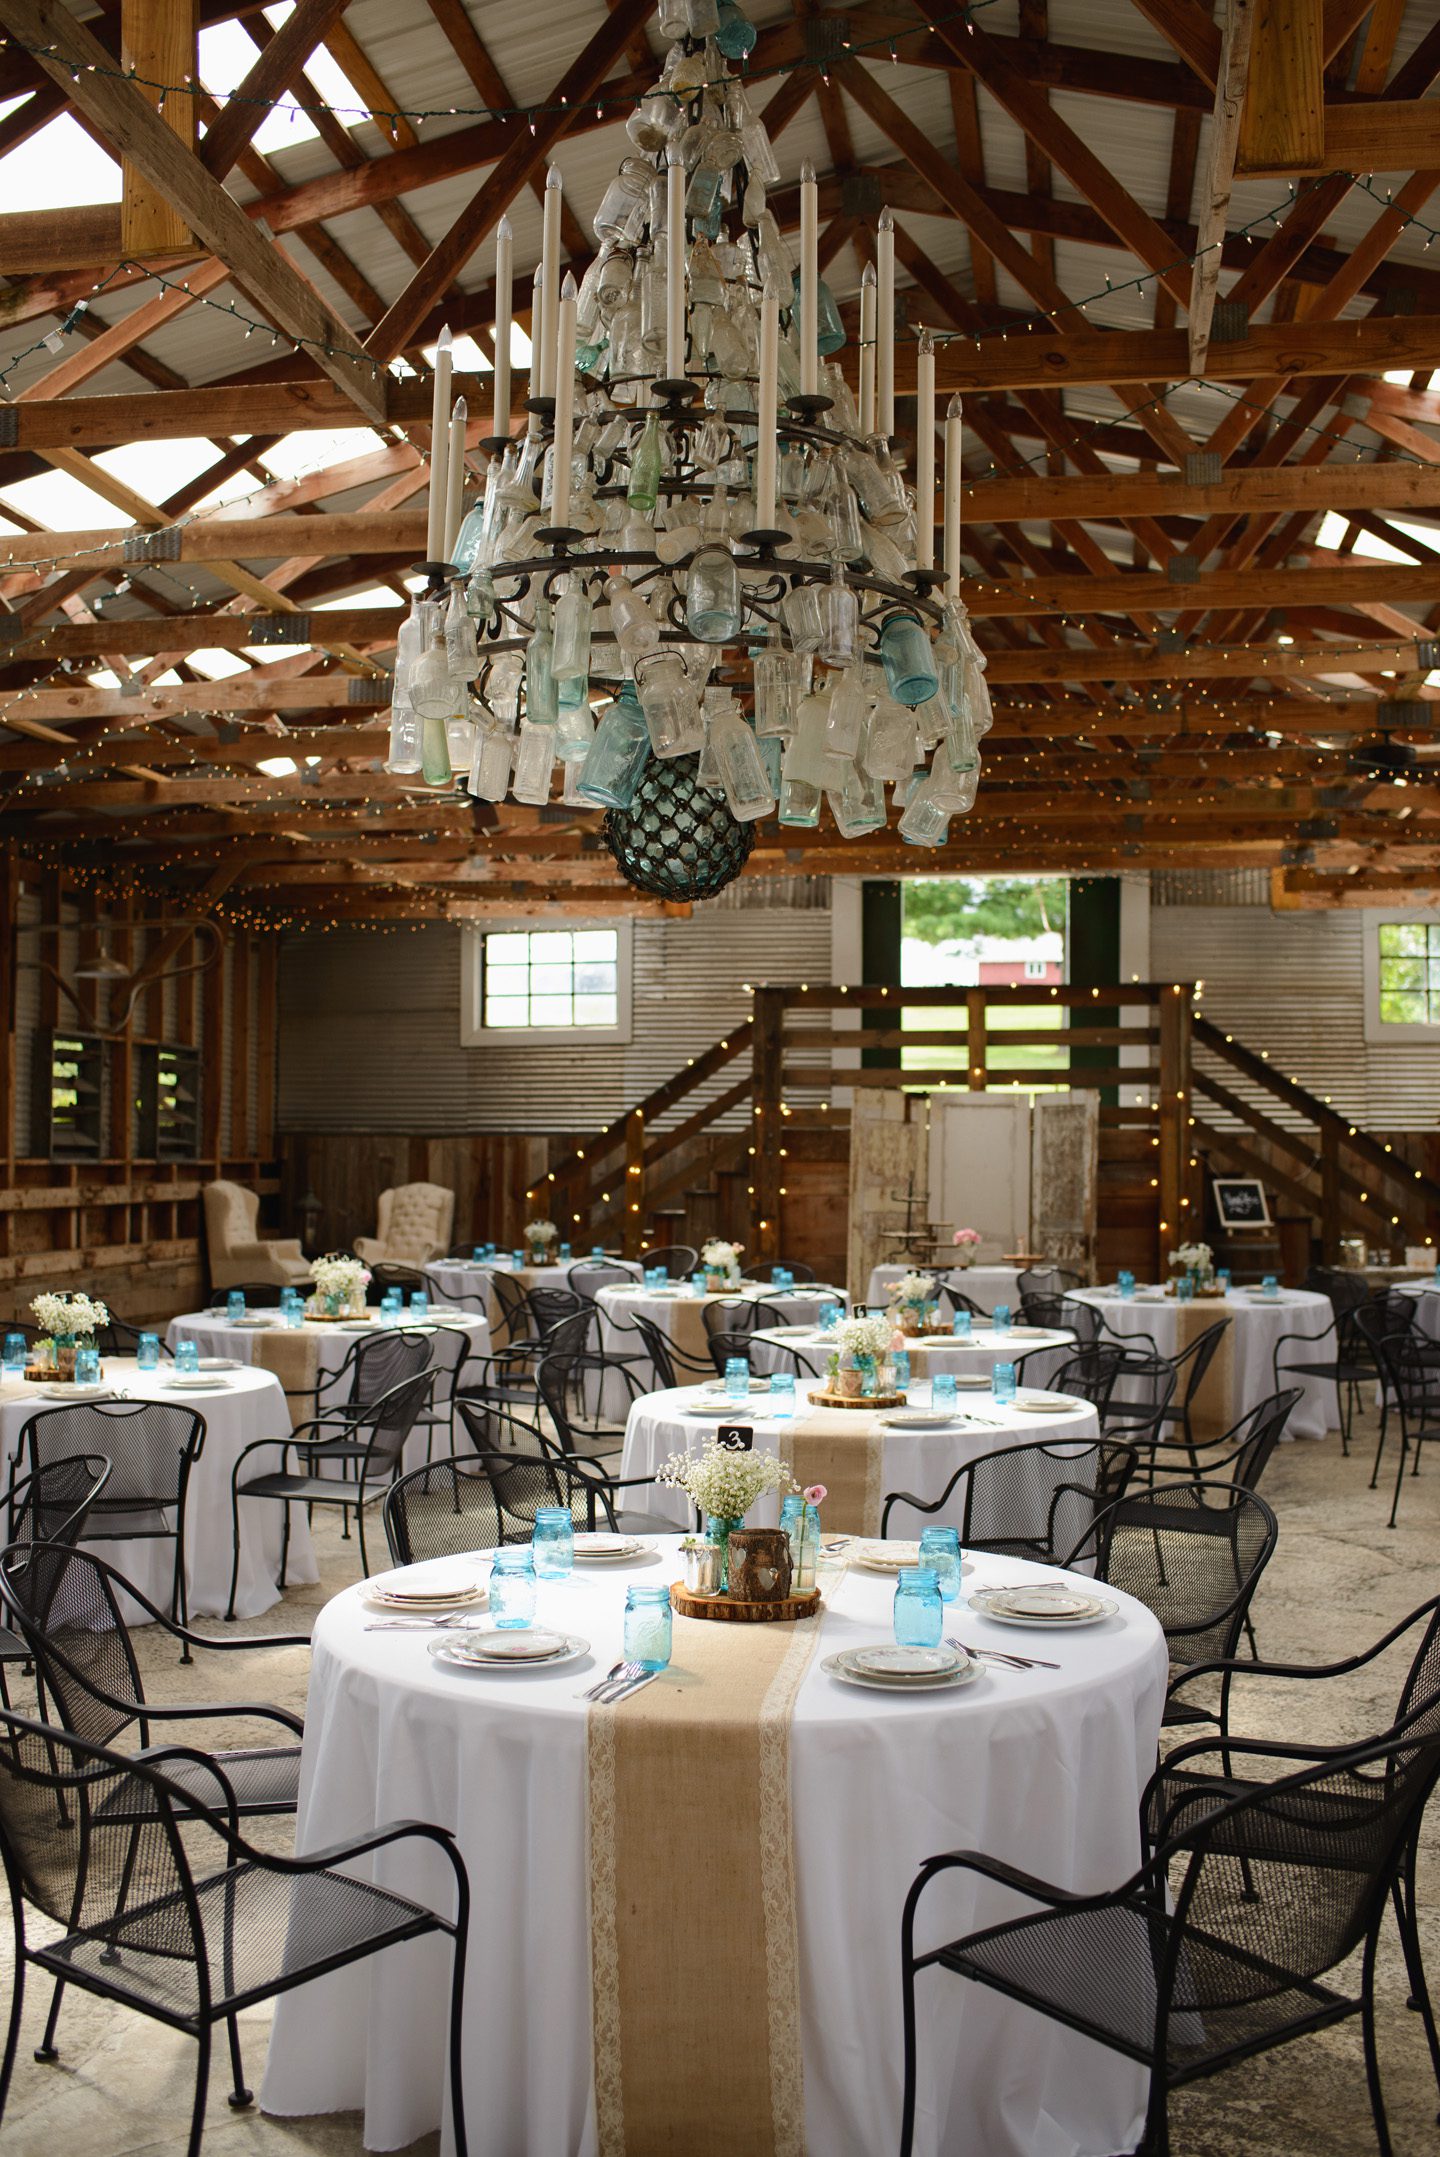 Kelly and Nathan by Neil GT Photography Sinkland Farms Christiansburg VA Wedding Reception Tables